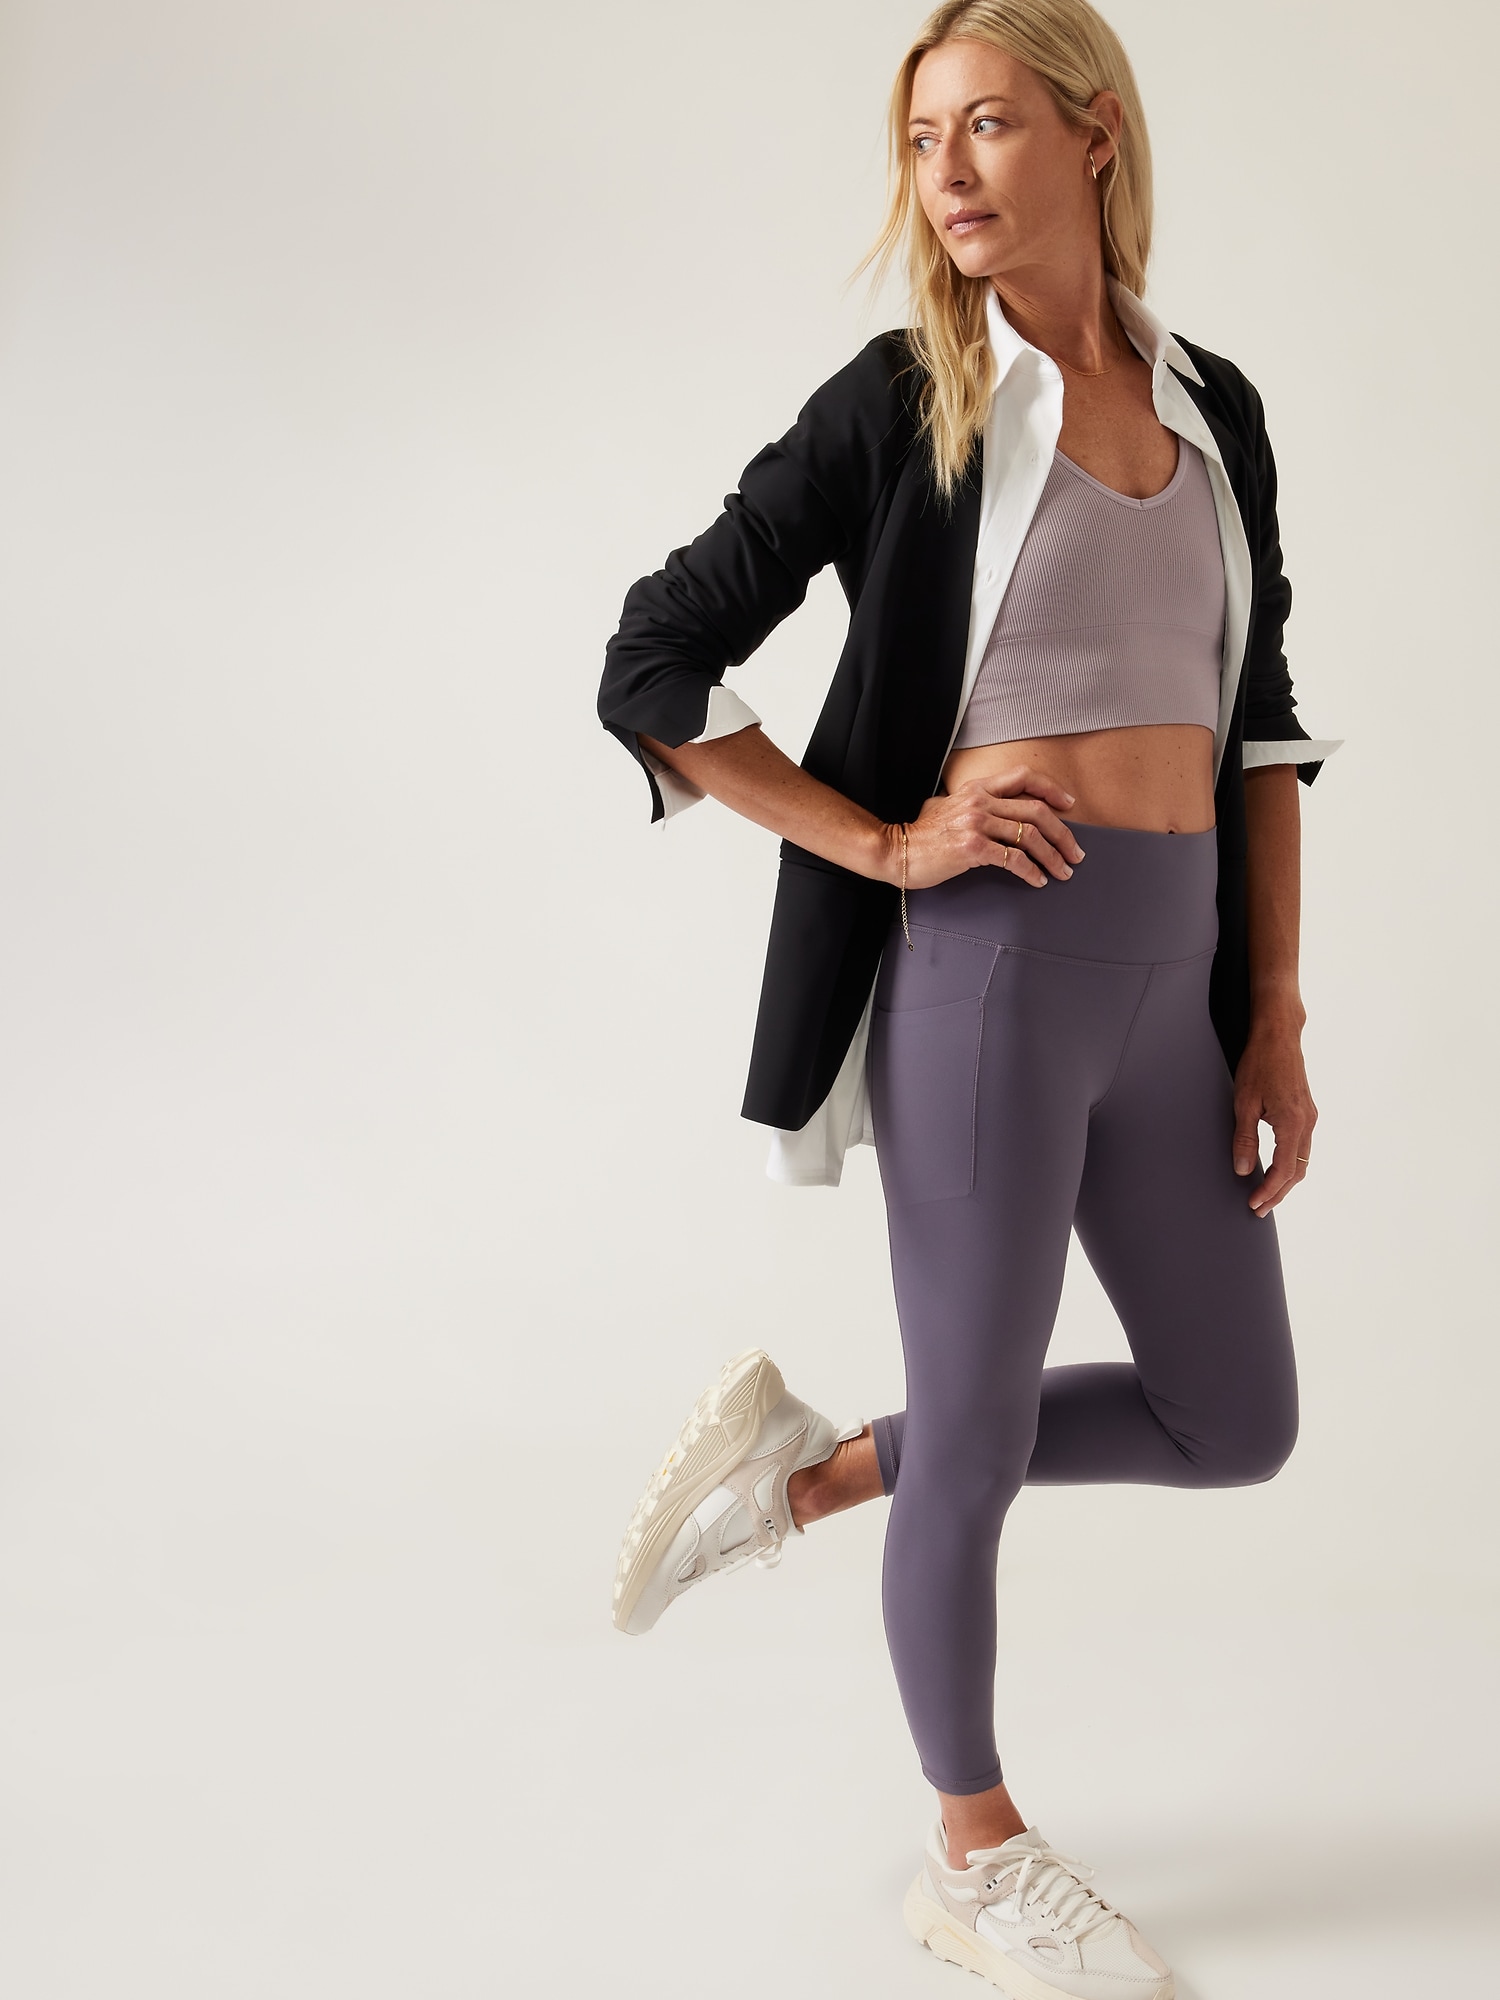 Lululemon Align™ High-rise Cropped Joggers In Heathered Black